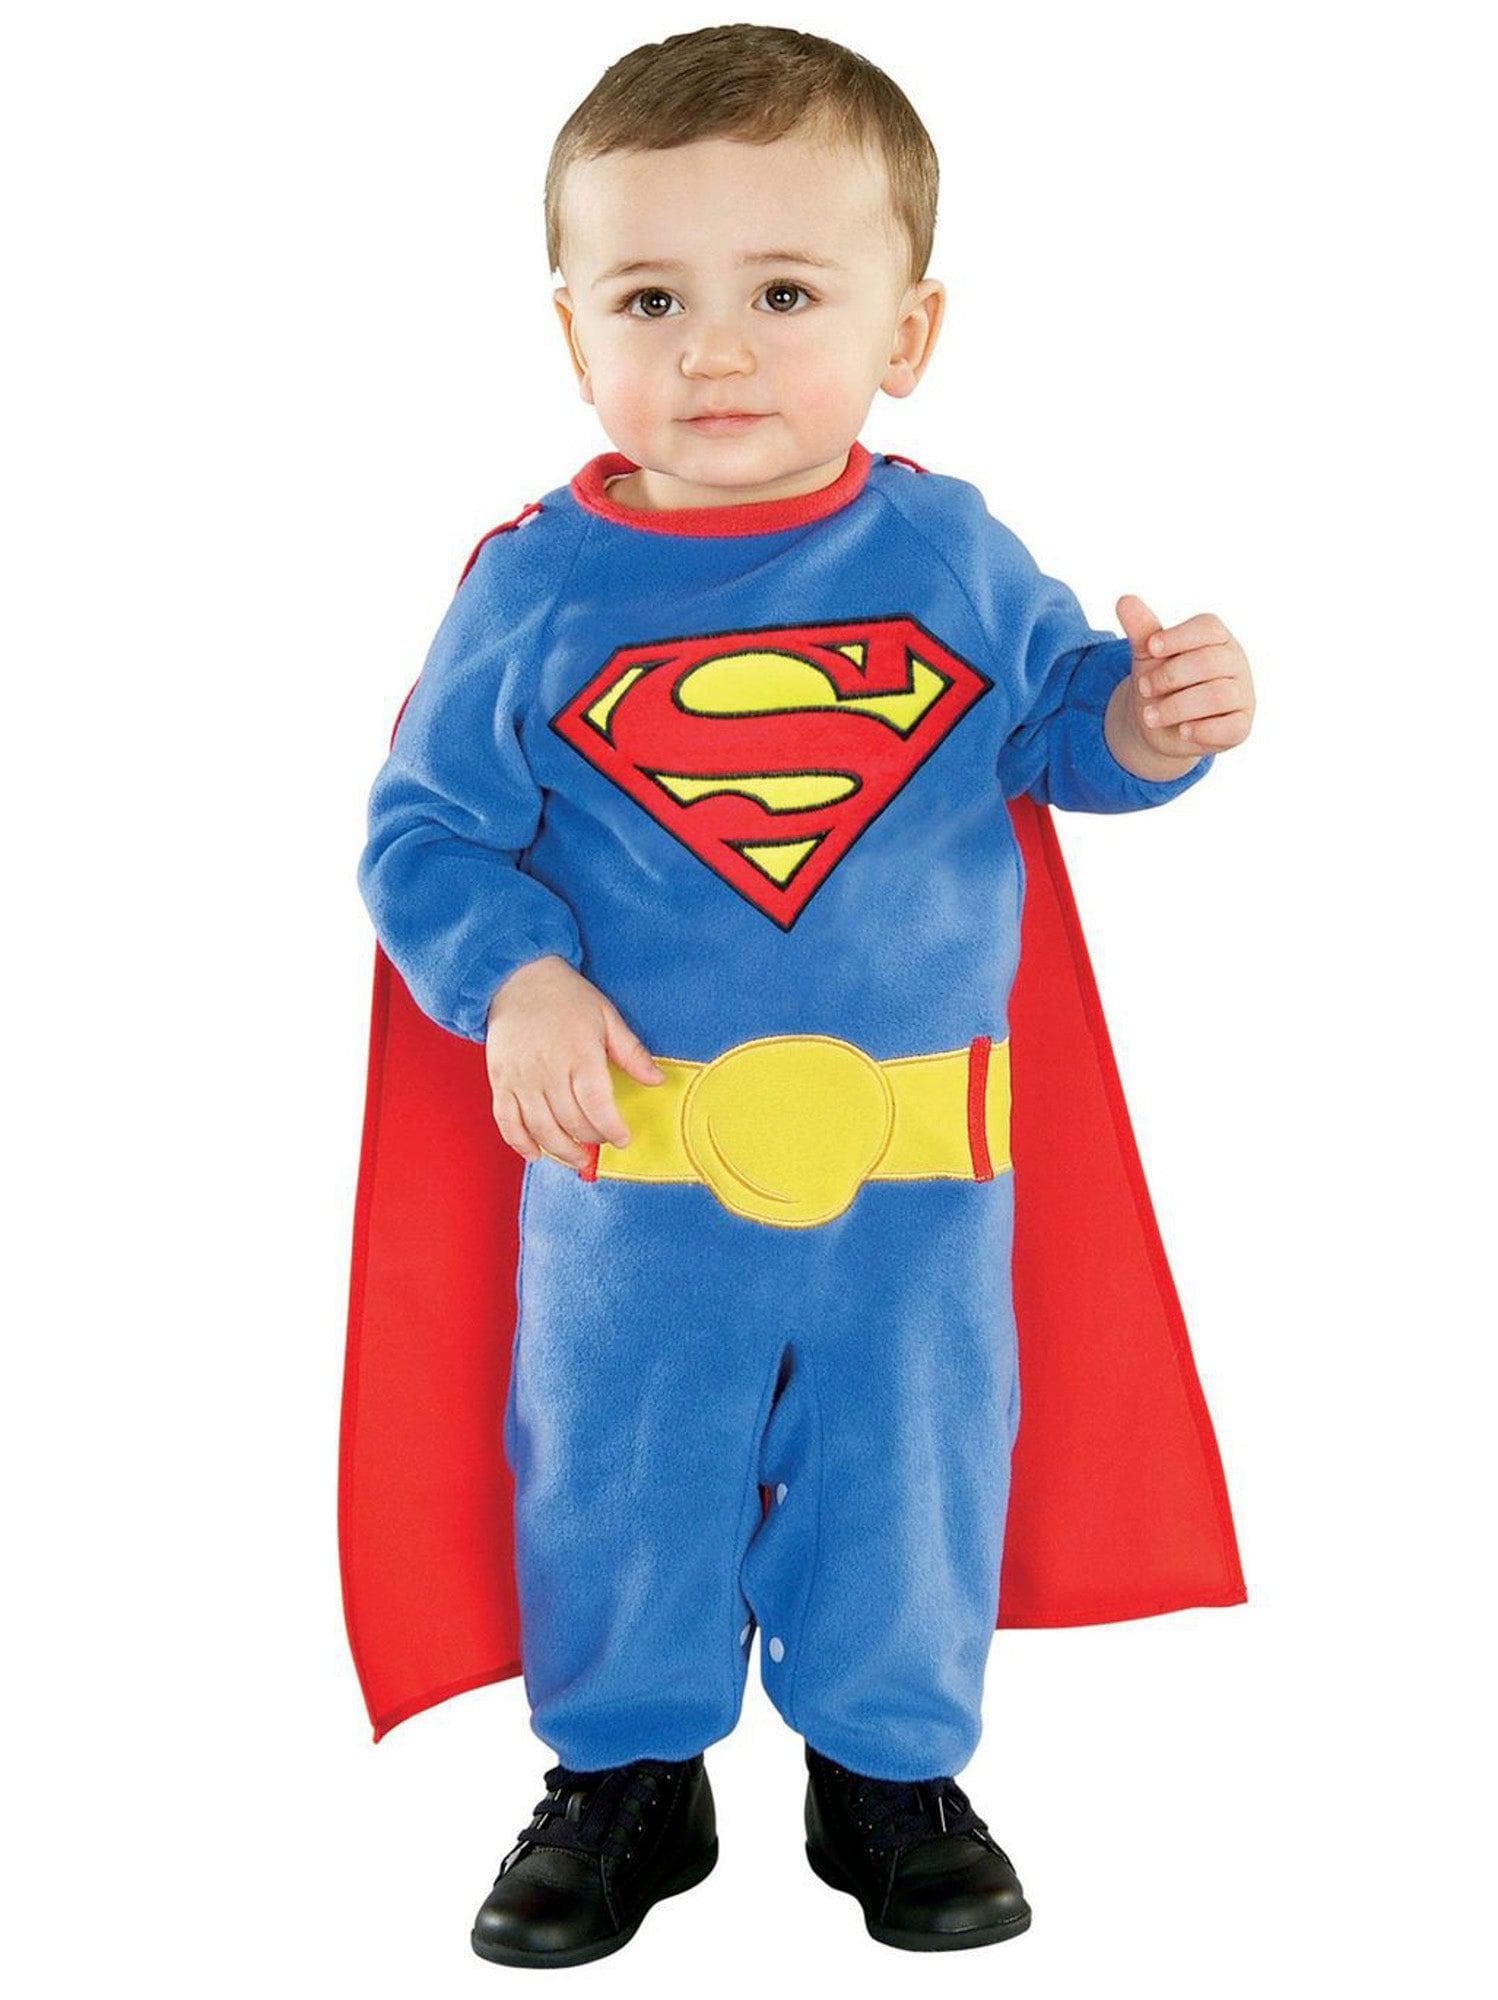 Baby/Toddler Justice League Superman Costume - costumes.com